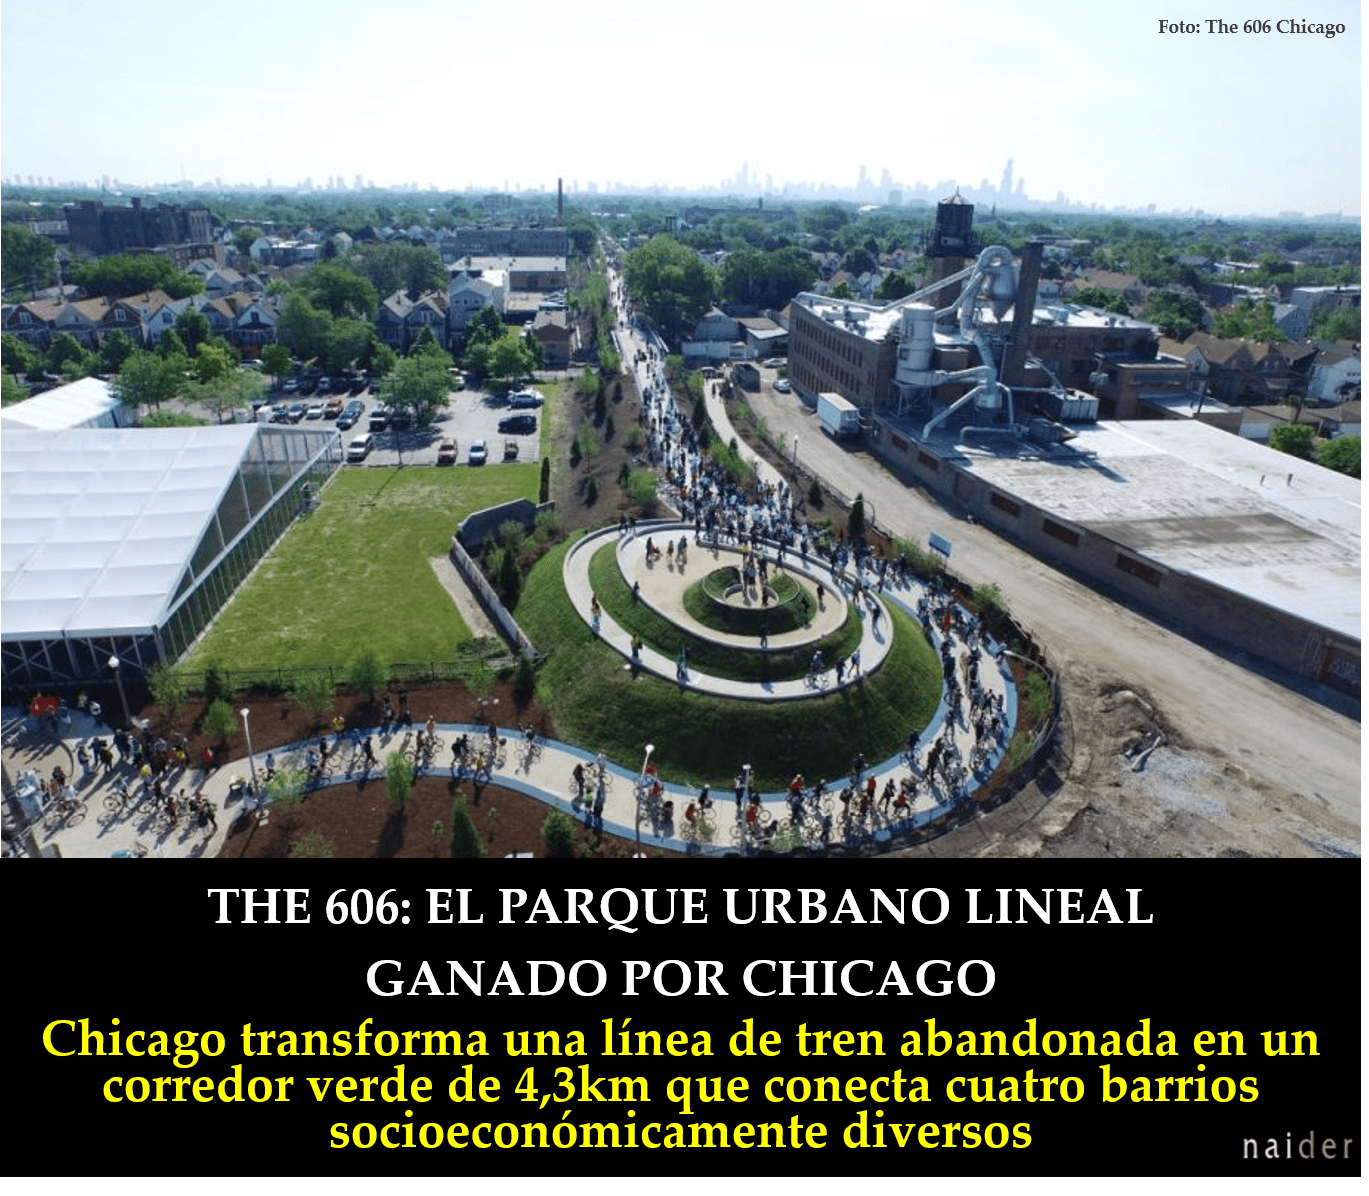 The 606 parque lineal Chicago infopost